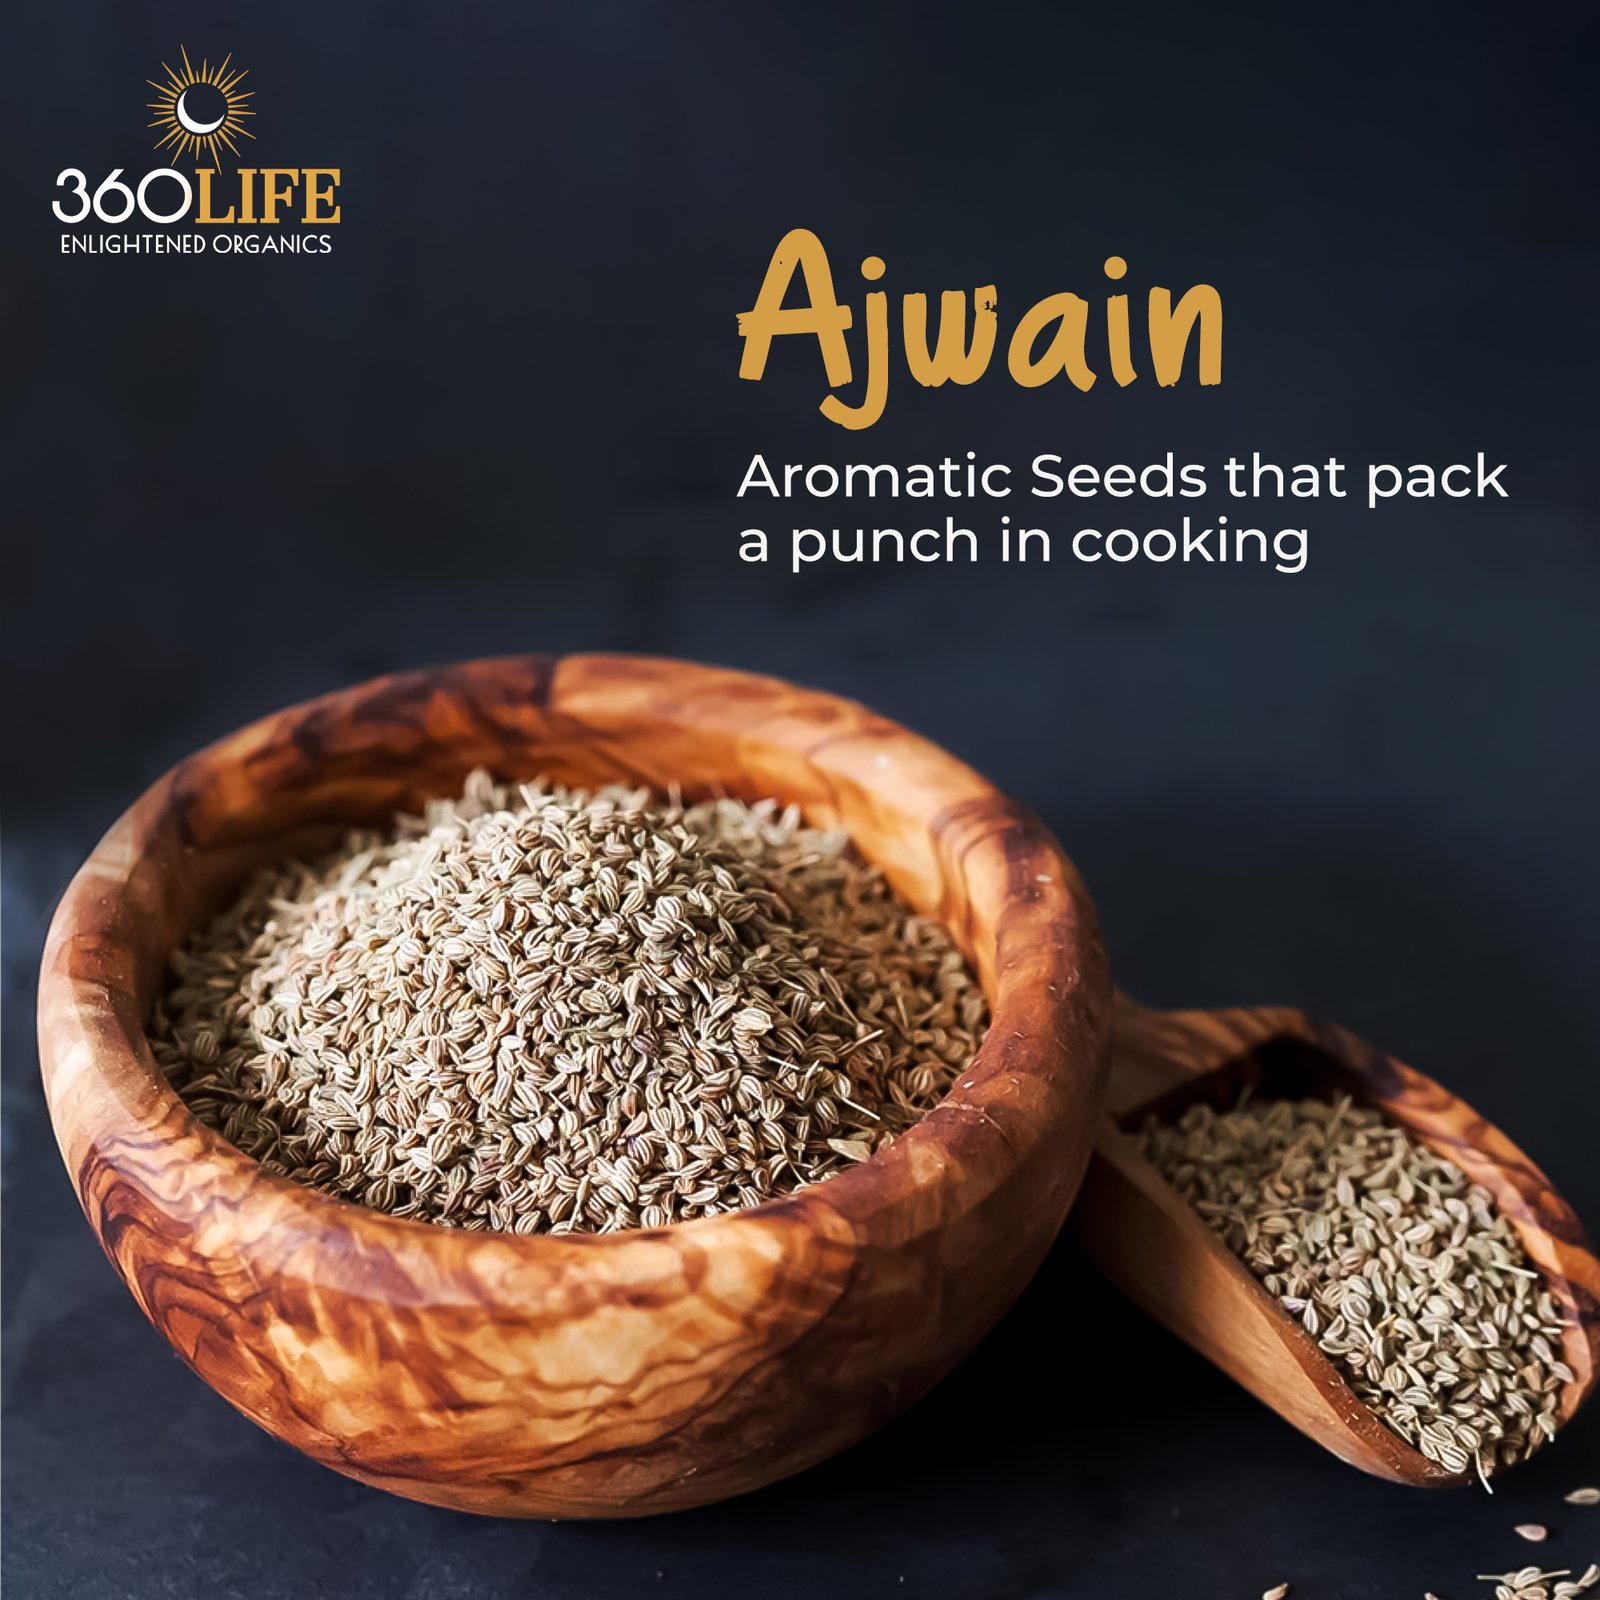 Ajwain: Aromatic Seeds That Pack a Punch in Cooking